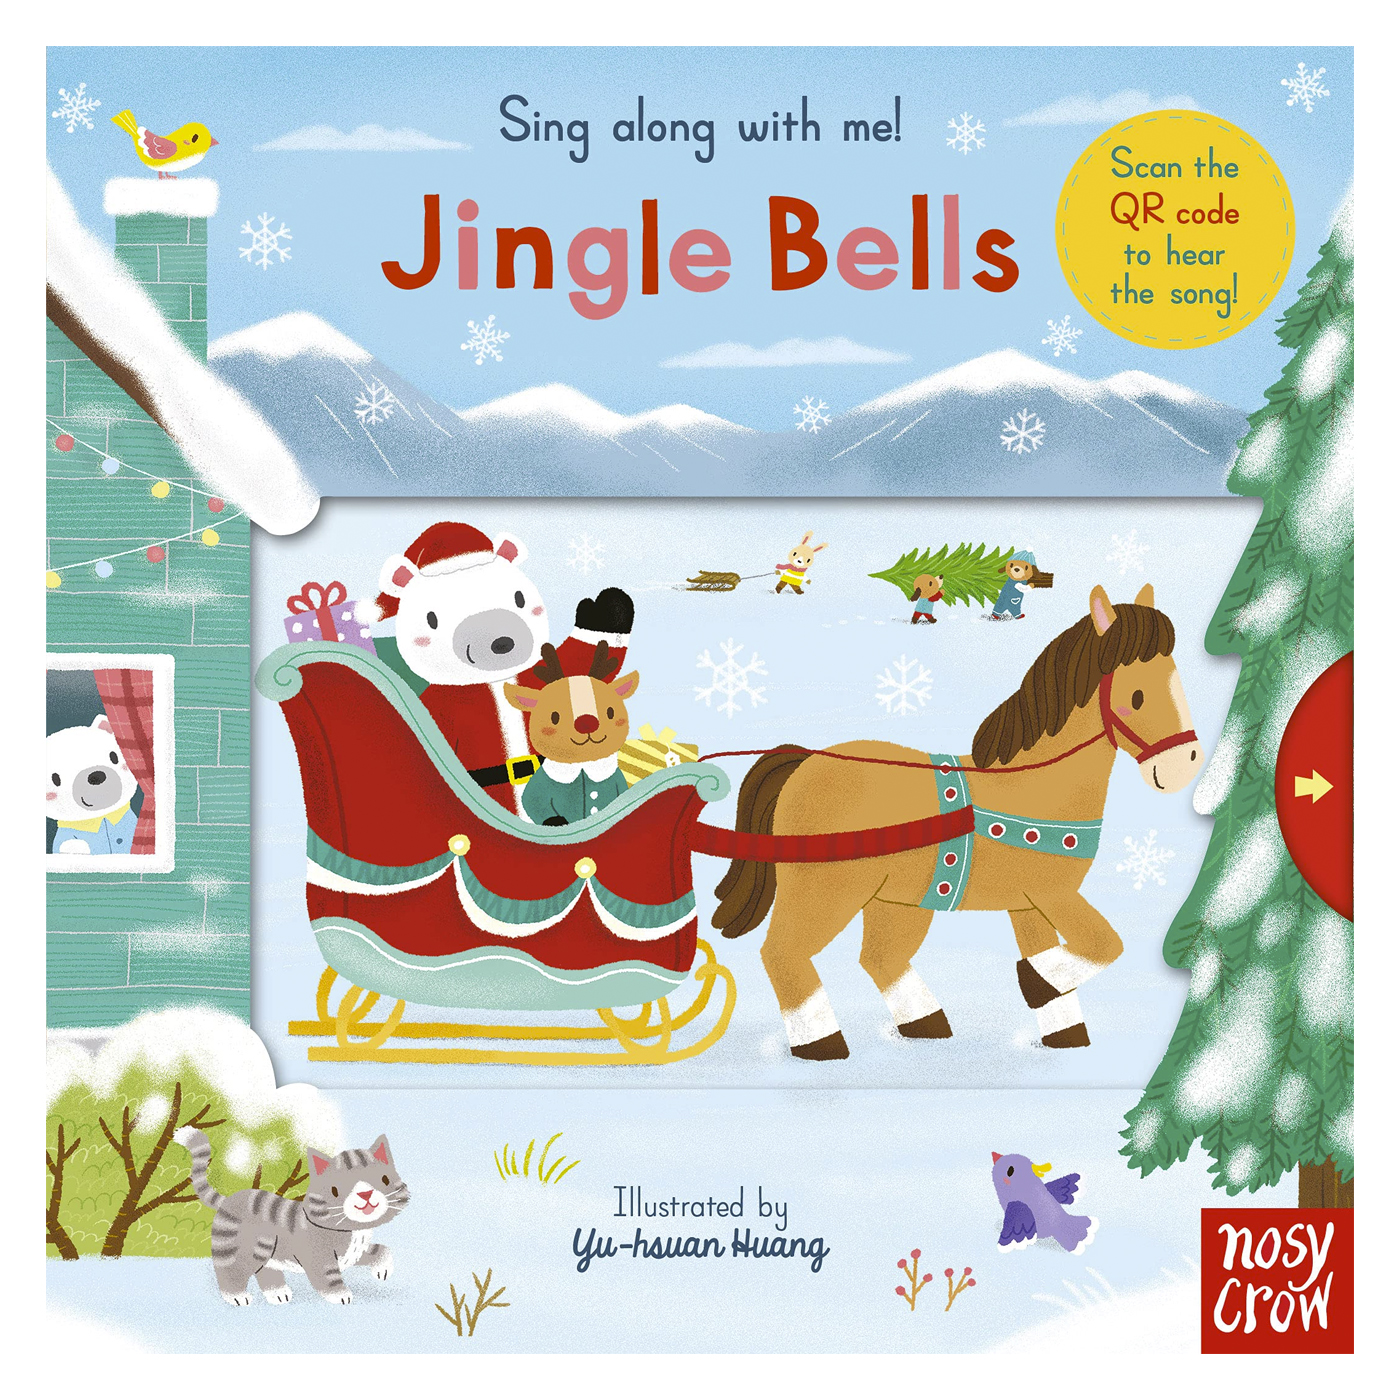 NOSY CROW Sing along with me! Jingle Bells